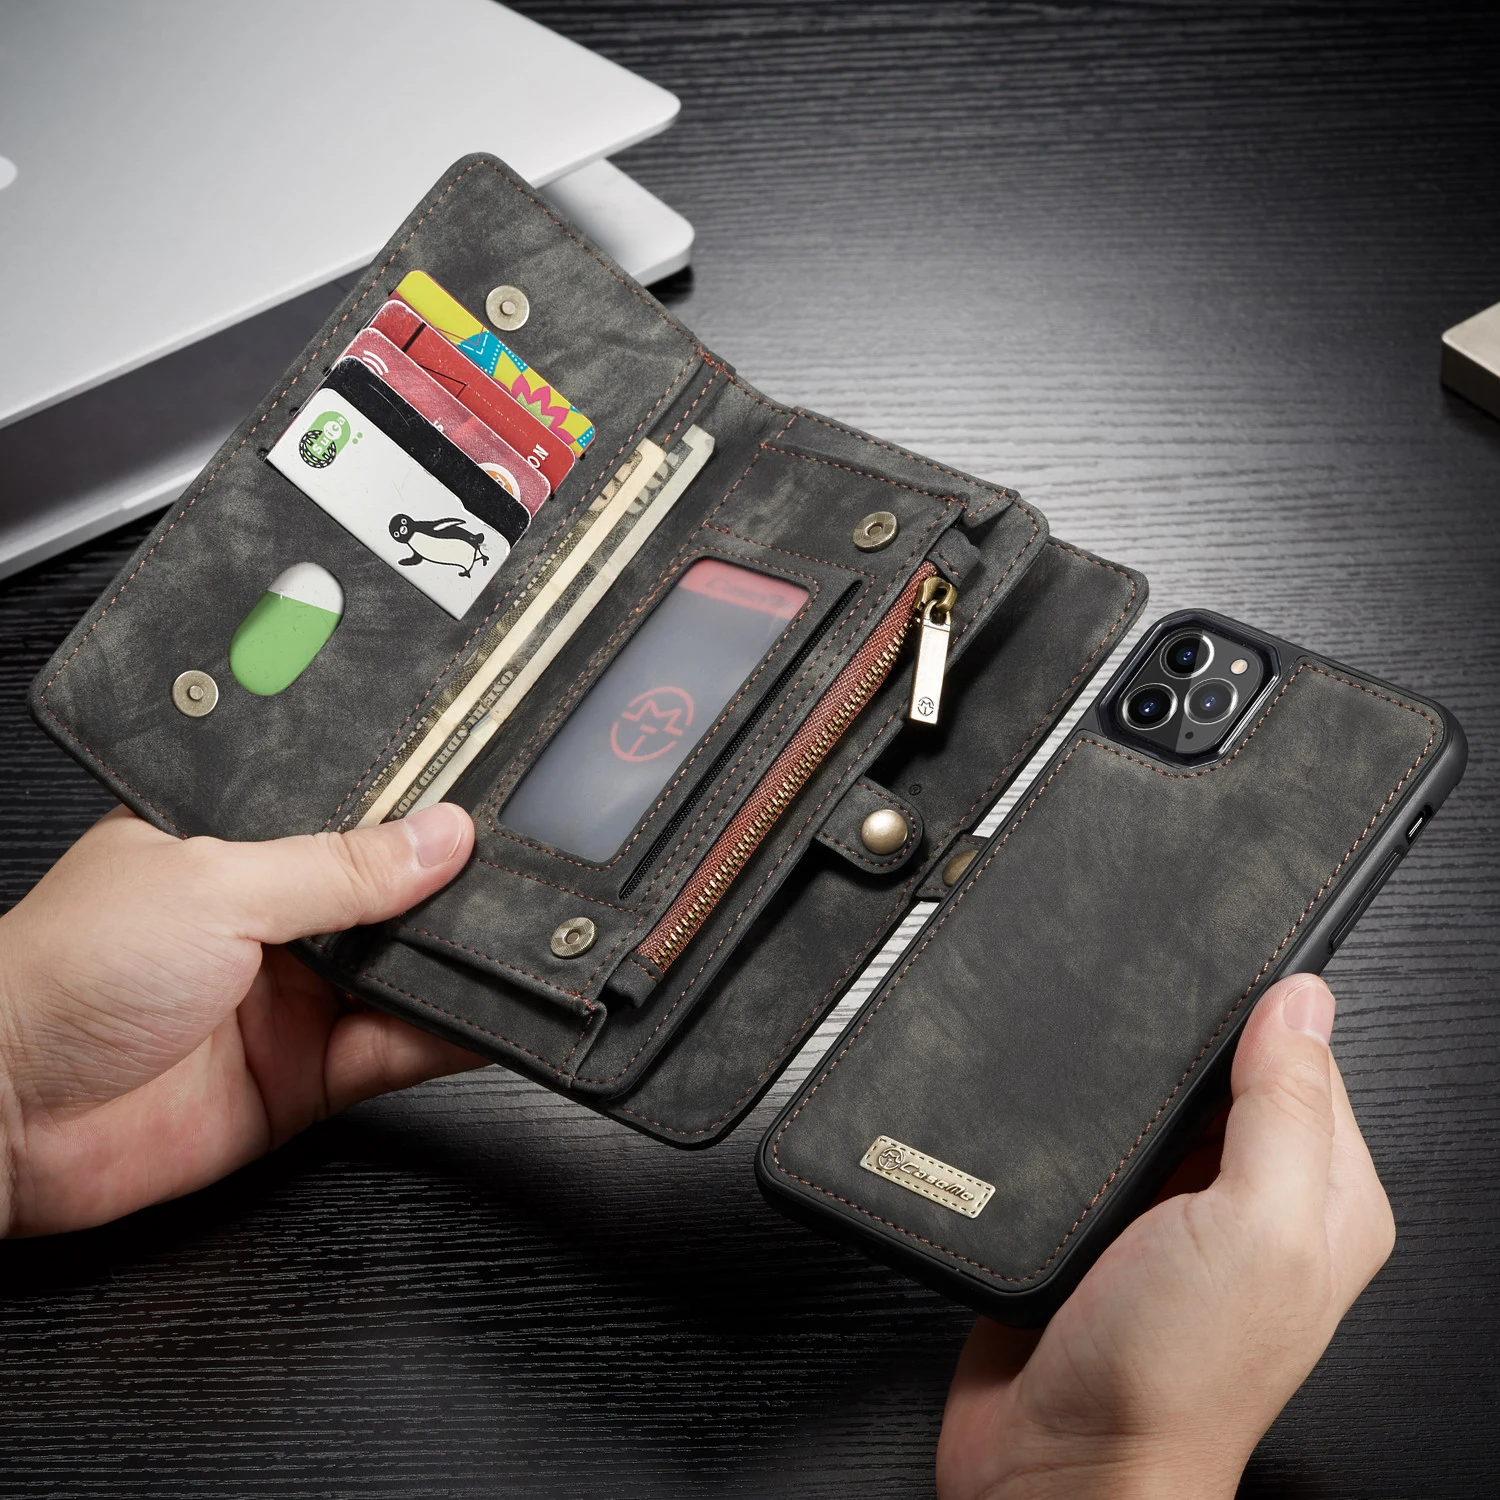 

Multi-function Wallet With Card For iphone11, 11Pro and 11ProMax Cases. The Case Can Hold Cash And Credit CARDS,With Zipper Bag